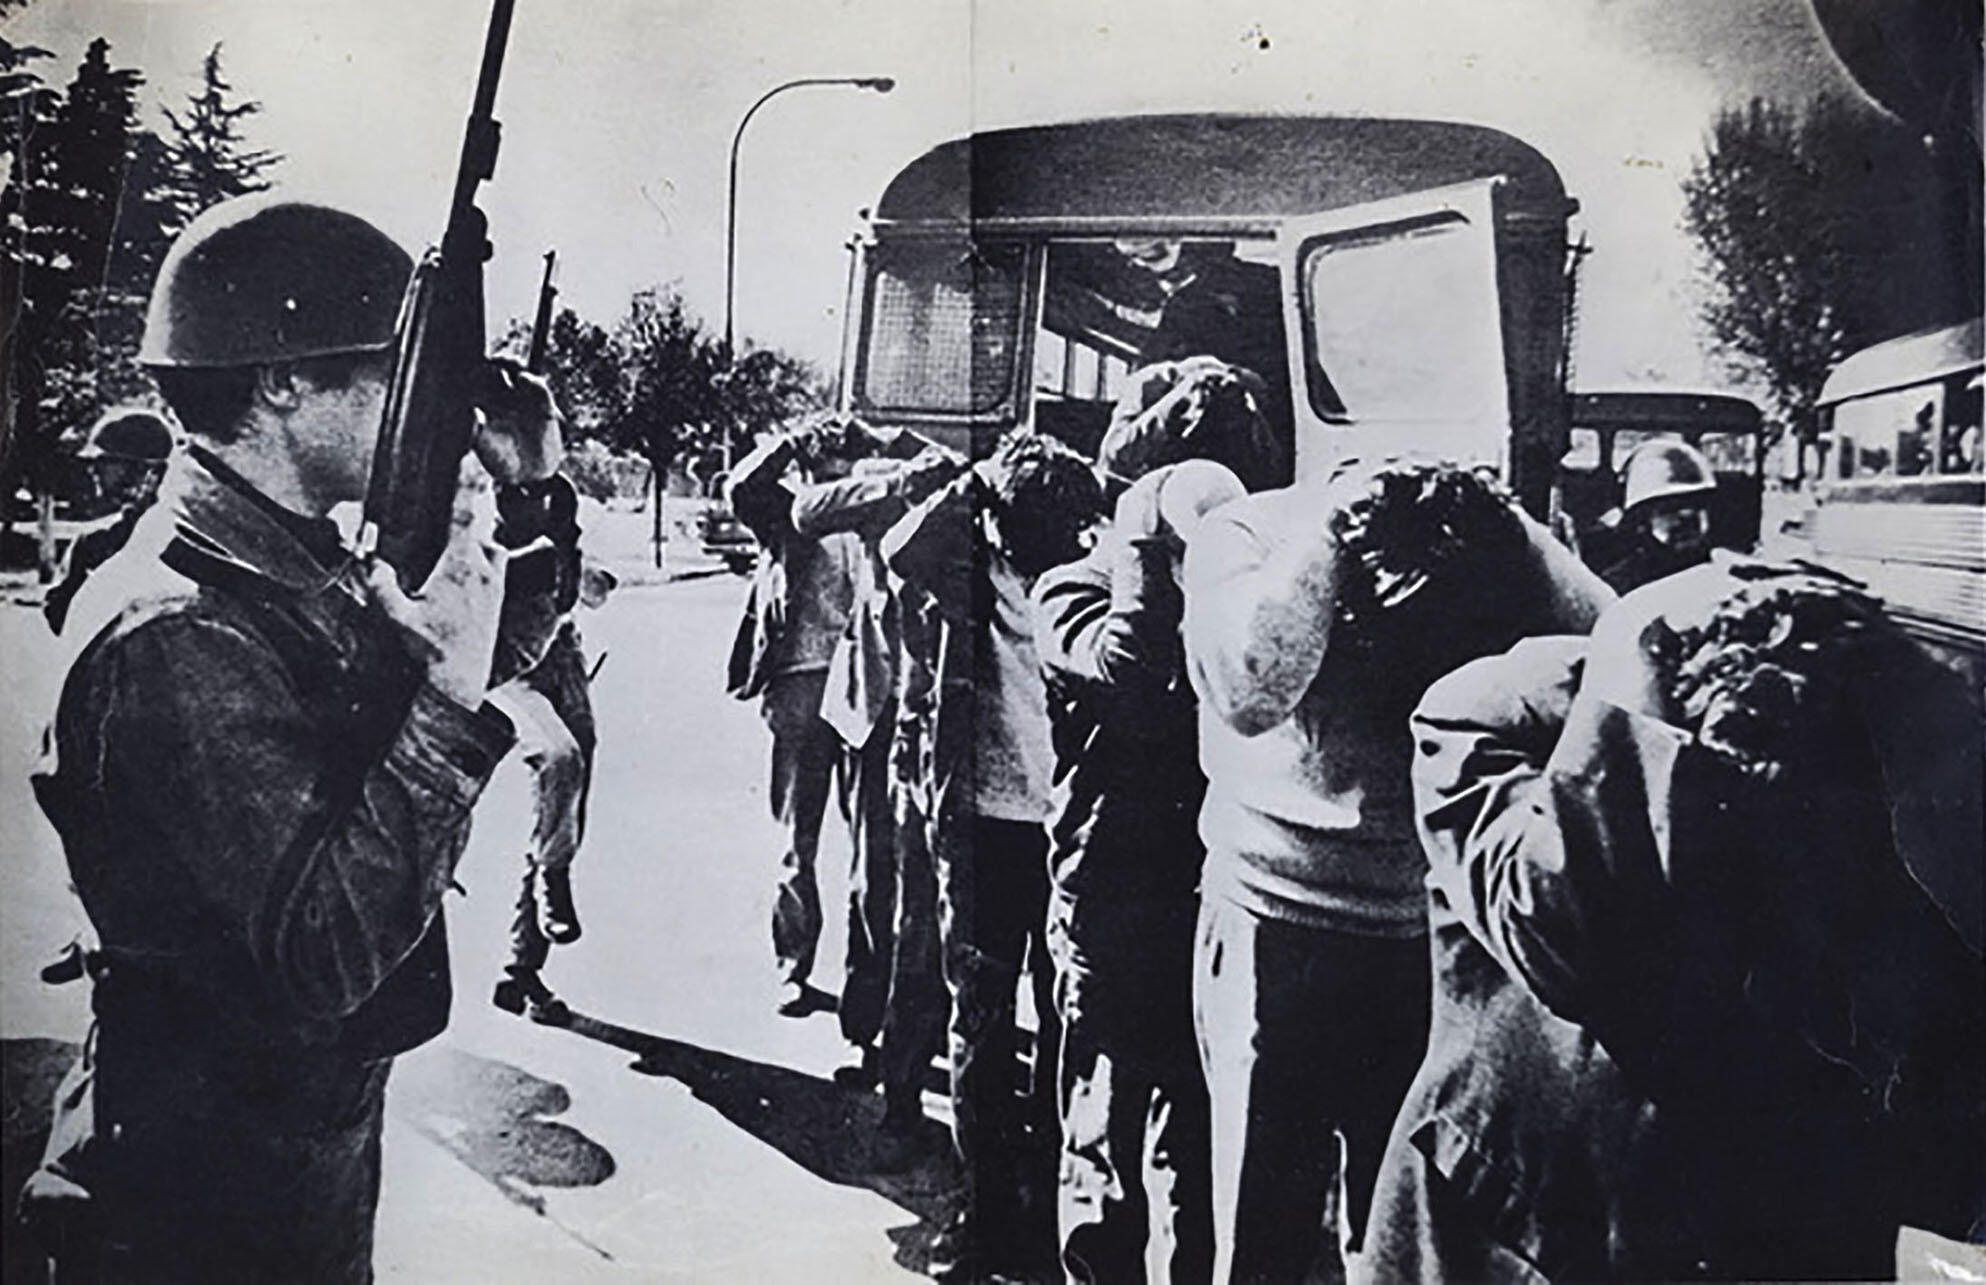 Prisoners being led away during the early days of the Pinochet dictatorship. (Photo from Diario 7.)